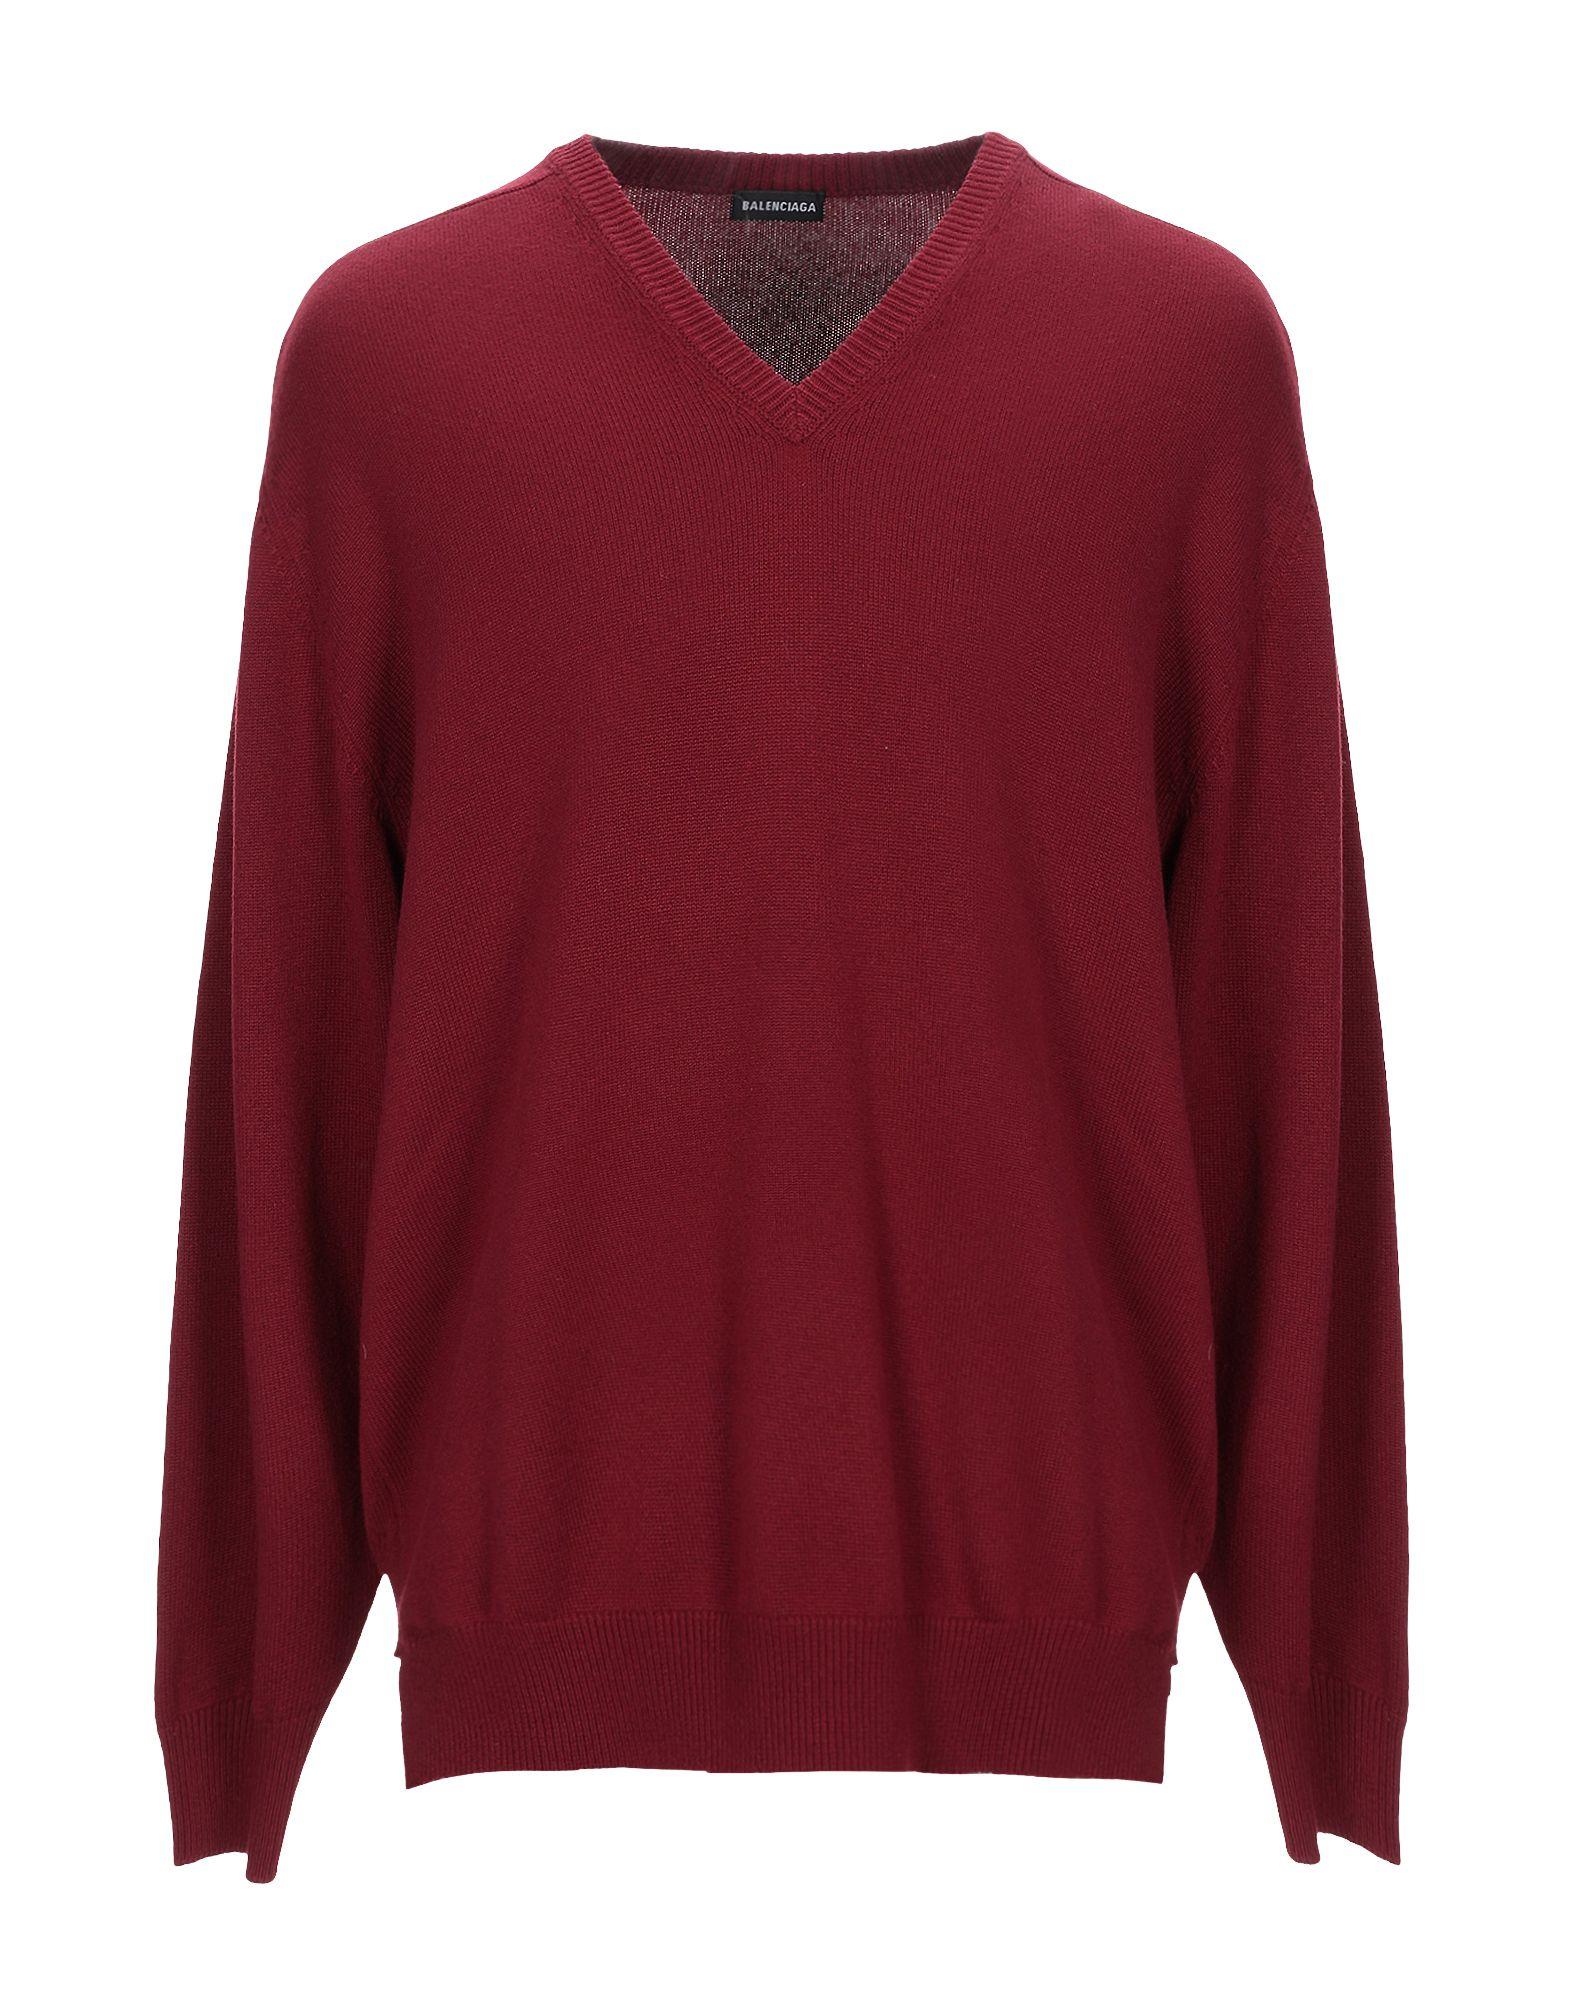 Balenciaga Cashmere Sweater in Maroon (Red) for Men - Lyst